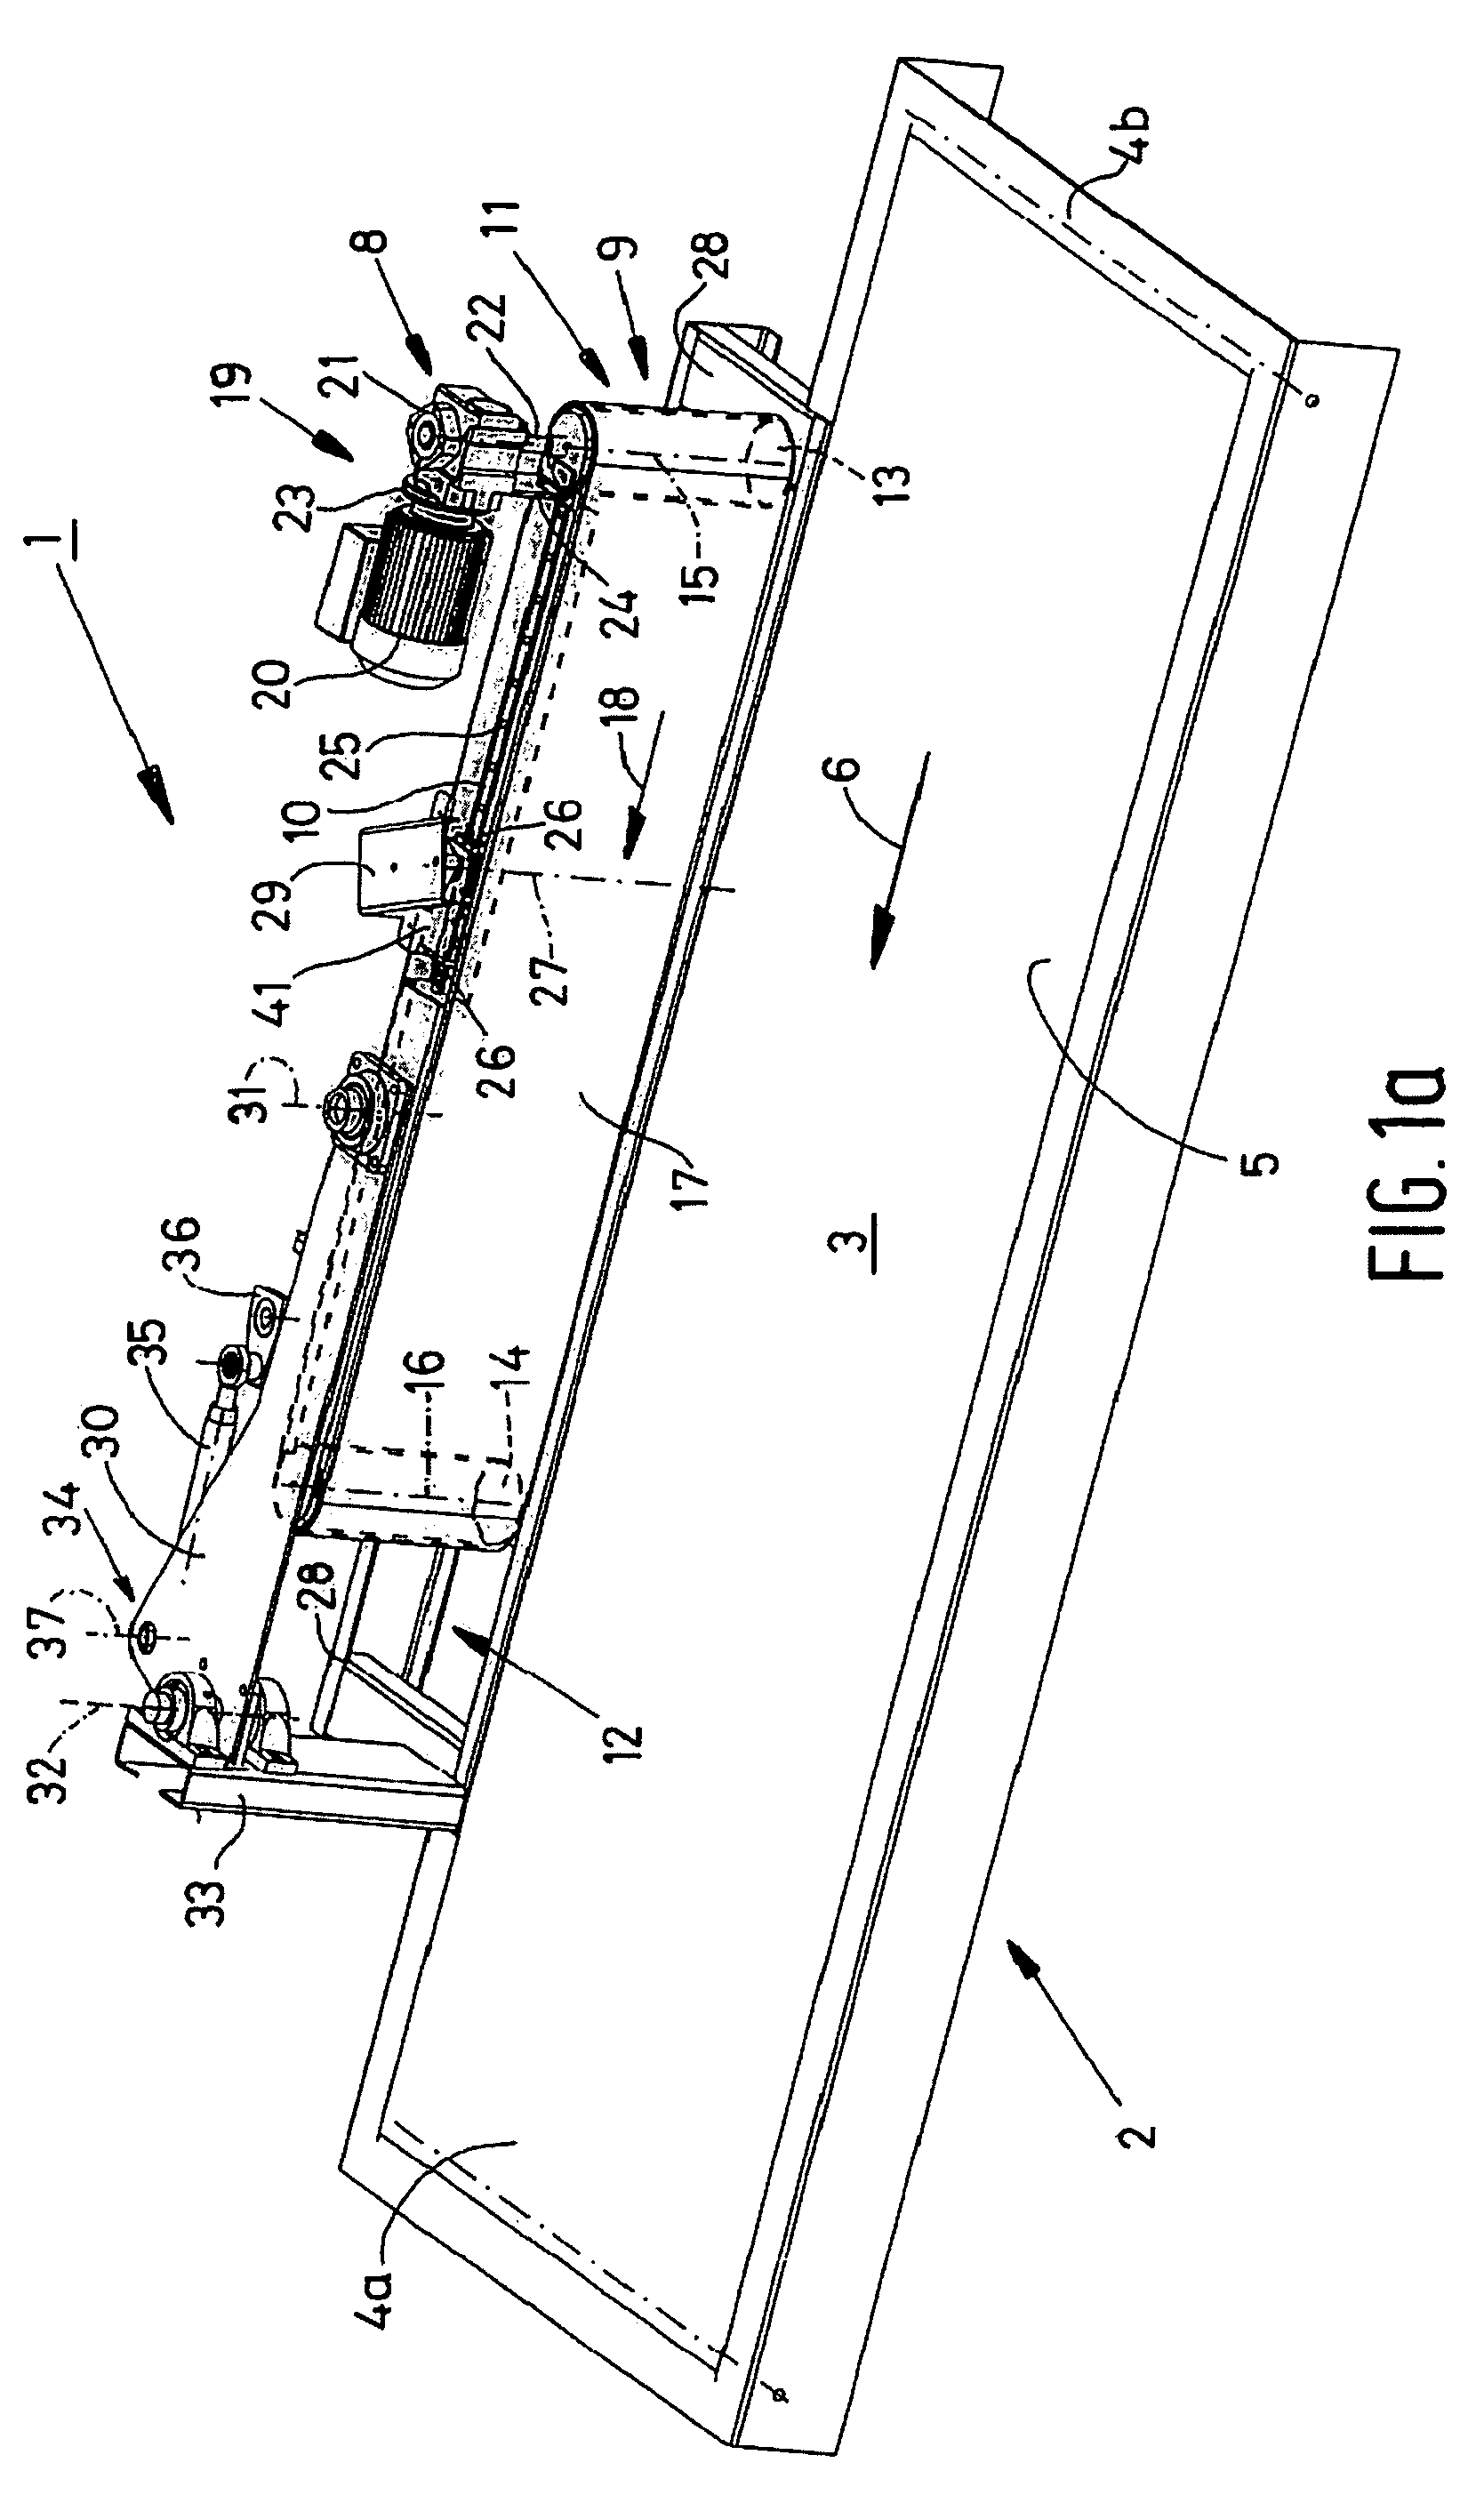 Device for diverting products sideways from a conveyor